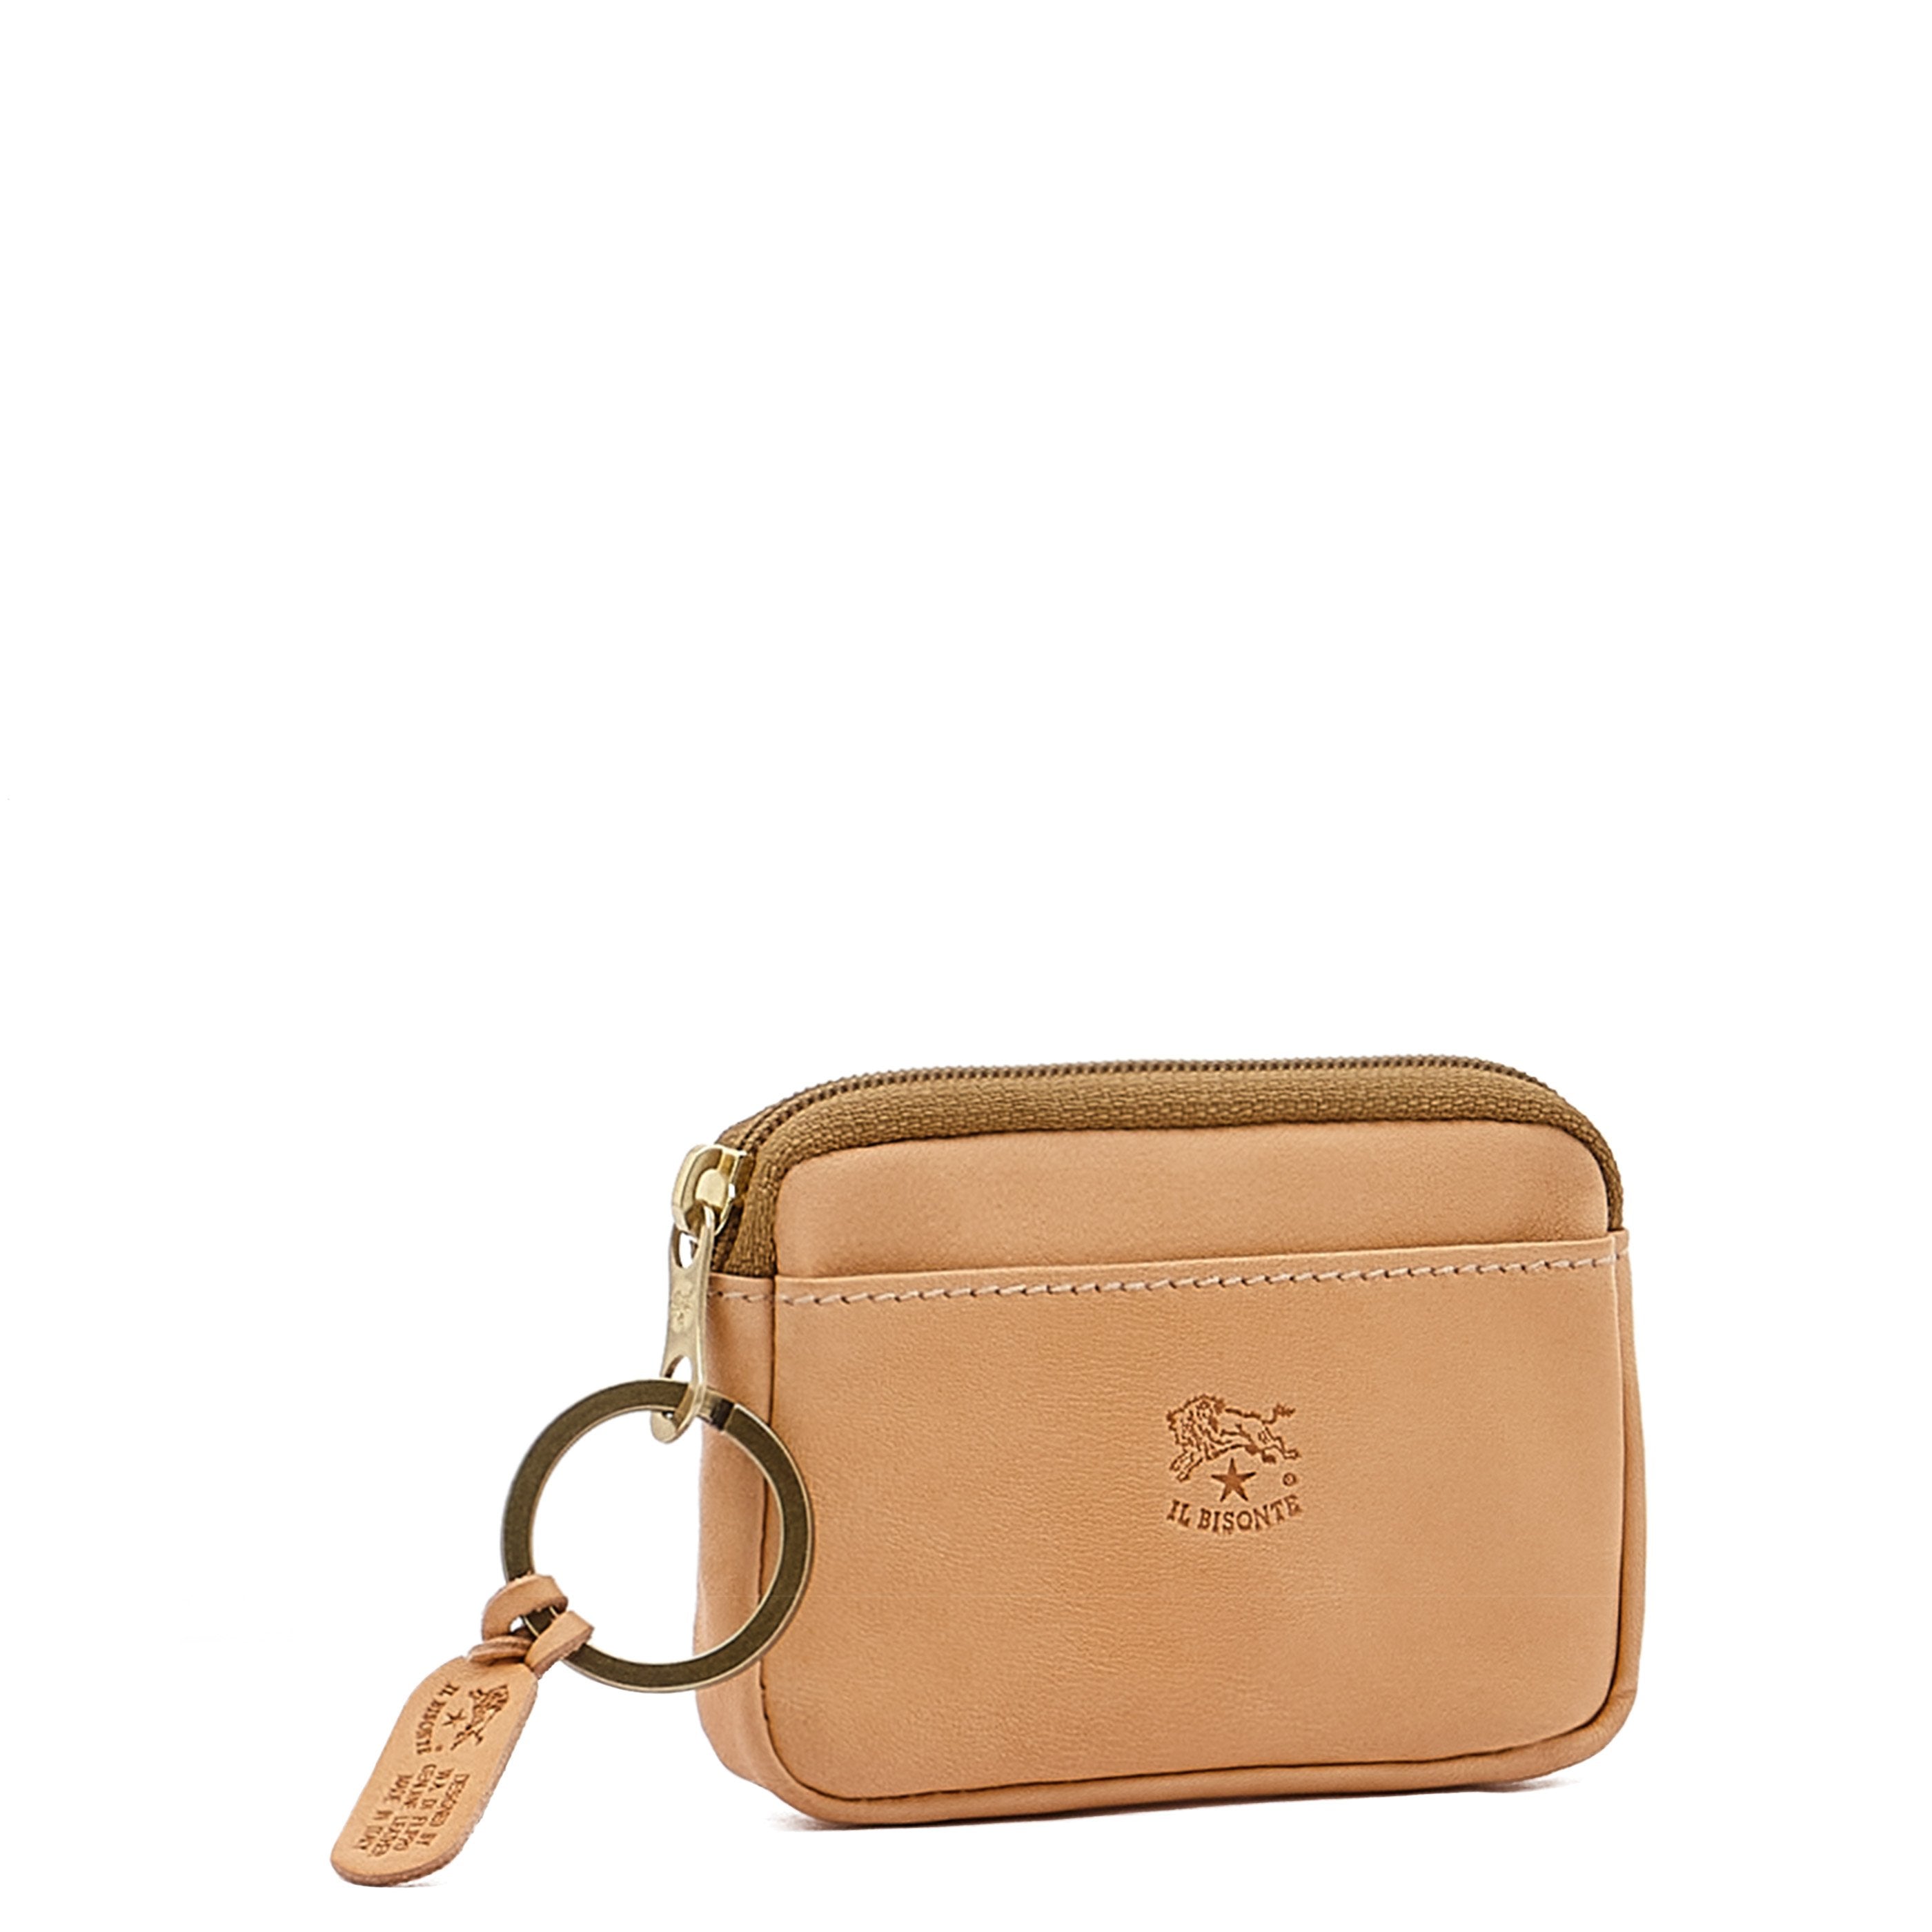 Coin purse in calf leather color natural